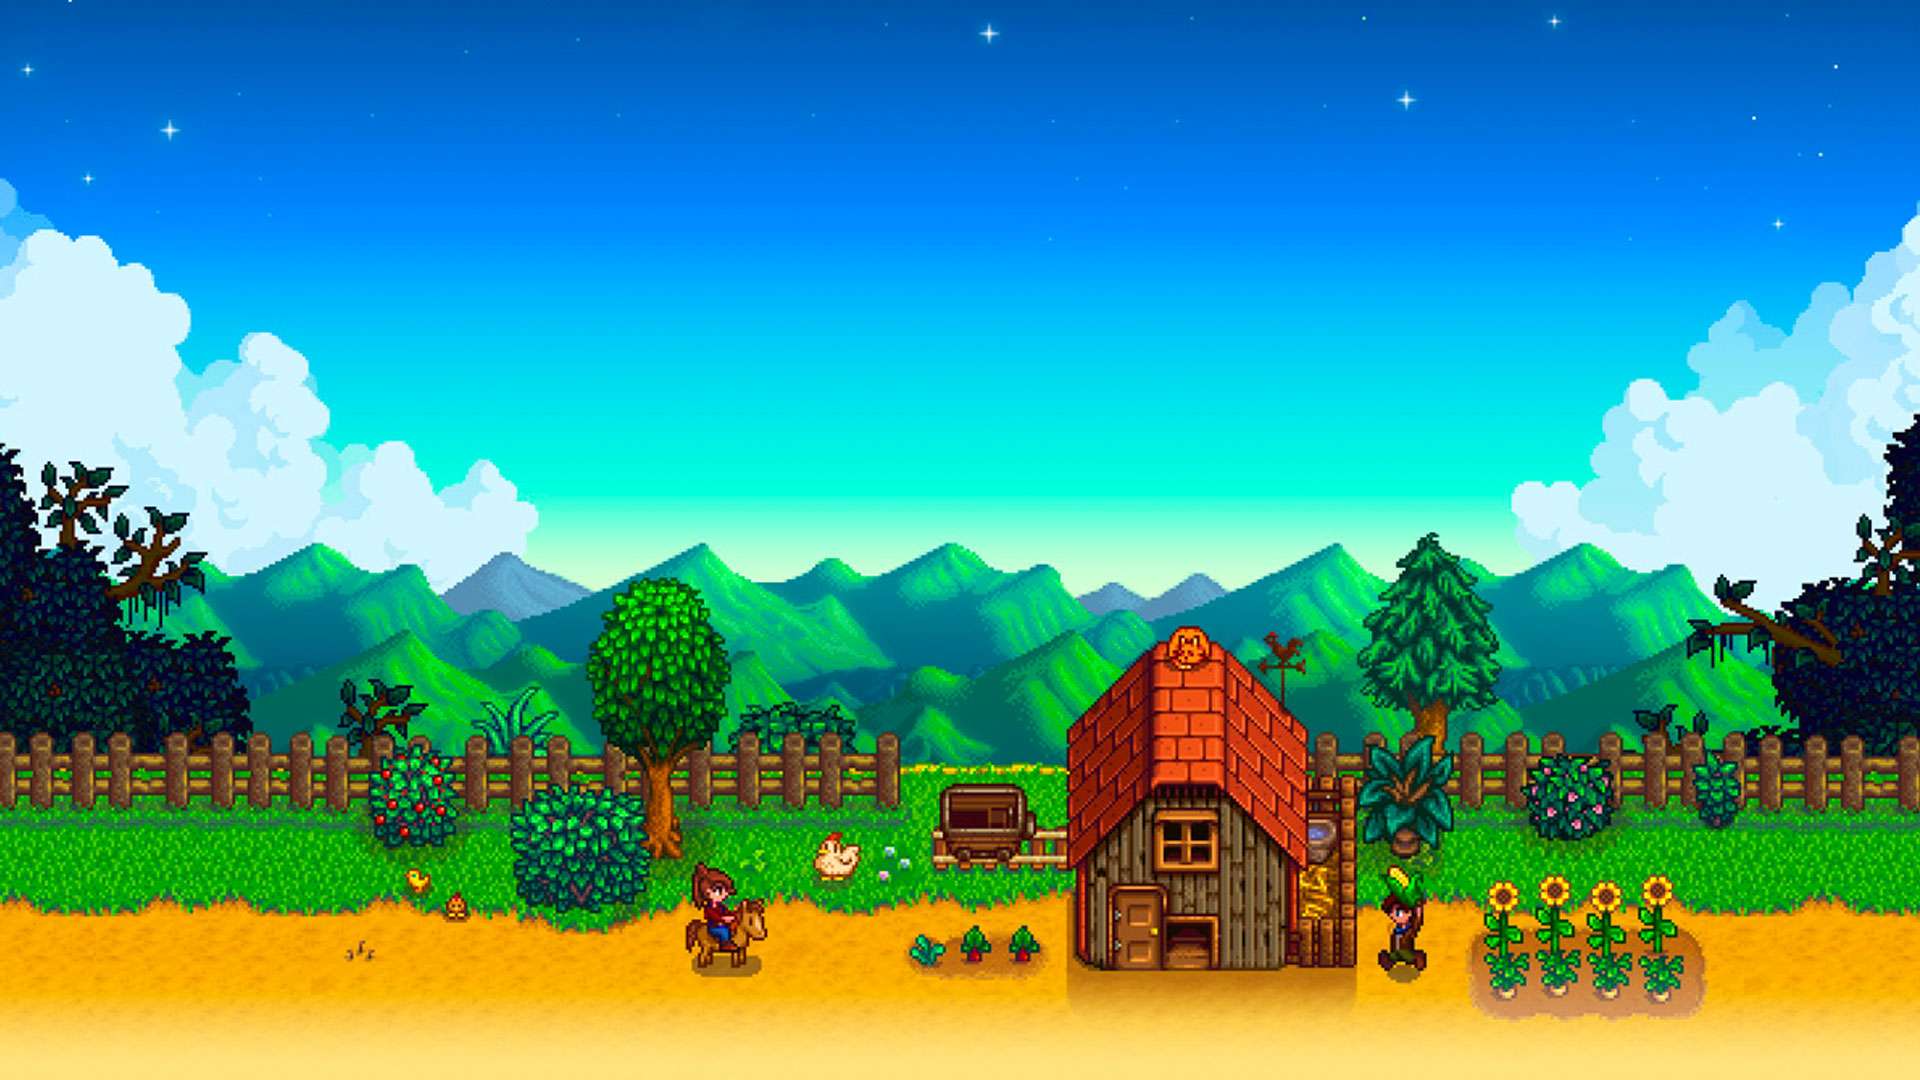 Stardew Valley creator says the game’s name “just came to me,” after the original “was not pleasant to say”